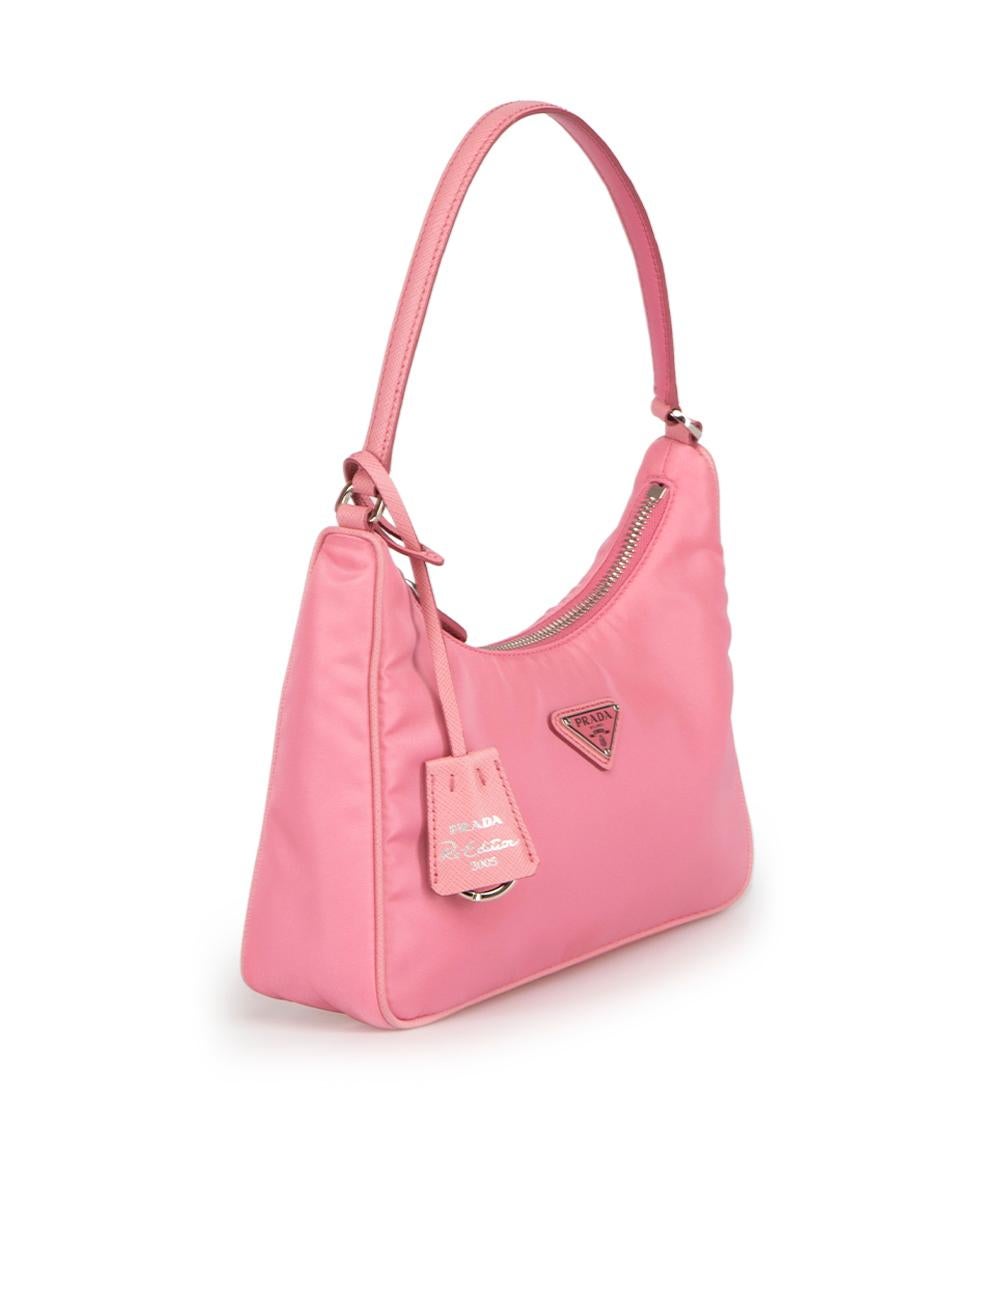 CONDITION is Very good. Minimal wear to bag is evident. Minimal wear to the piped trim with light marks to the leather on this used Prada designer resale item.
 
Details
Re-Edition 2005
Pink
Nylon
Mini shoulder bag
1x Leather strap
1x Main zipped